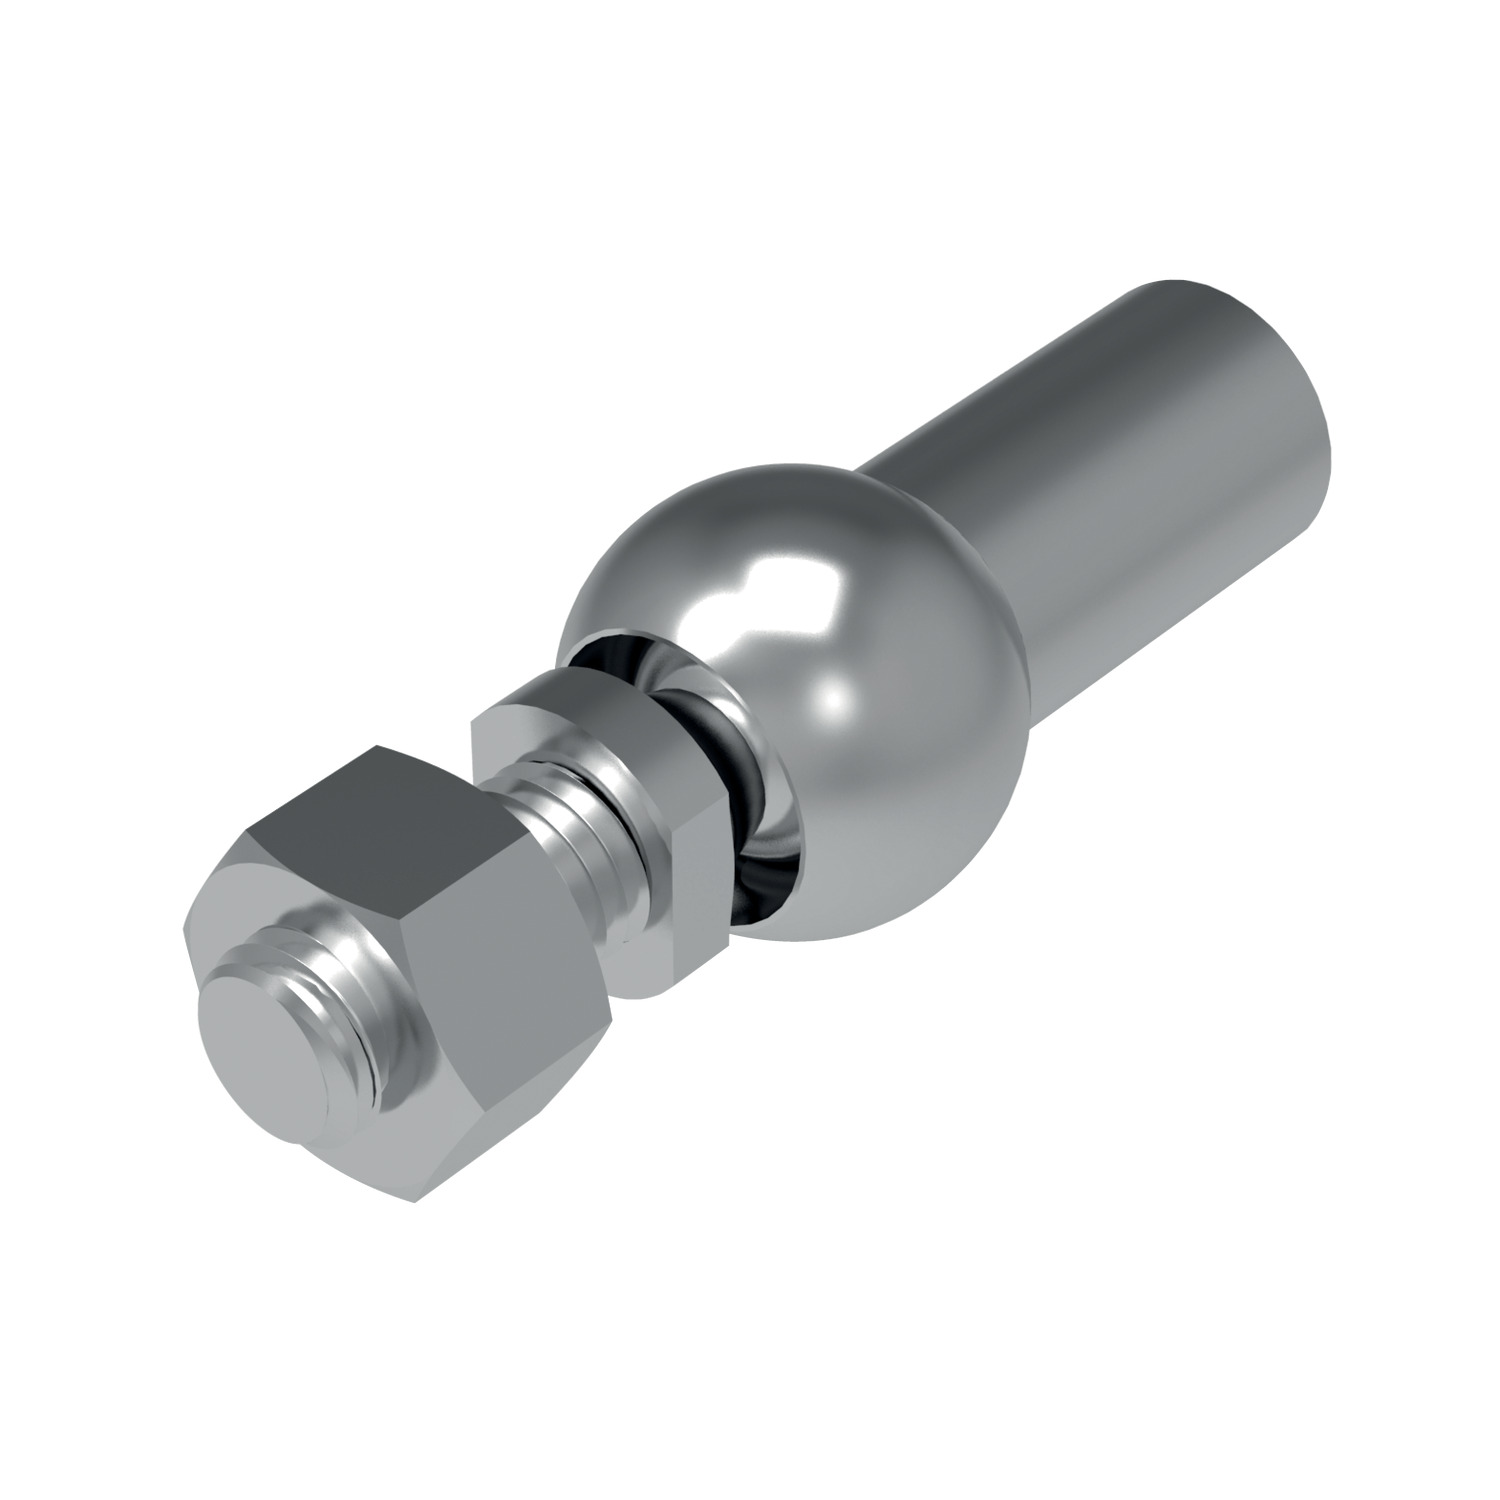 65526.W0010 Stainless Axial Ball and Socket Joints. Left - 16 - M10 - 35